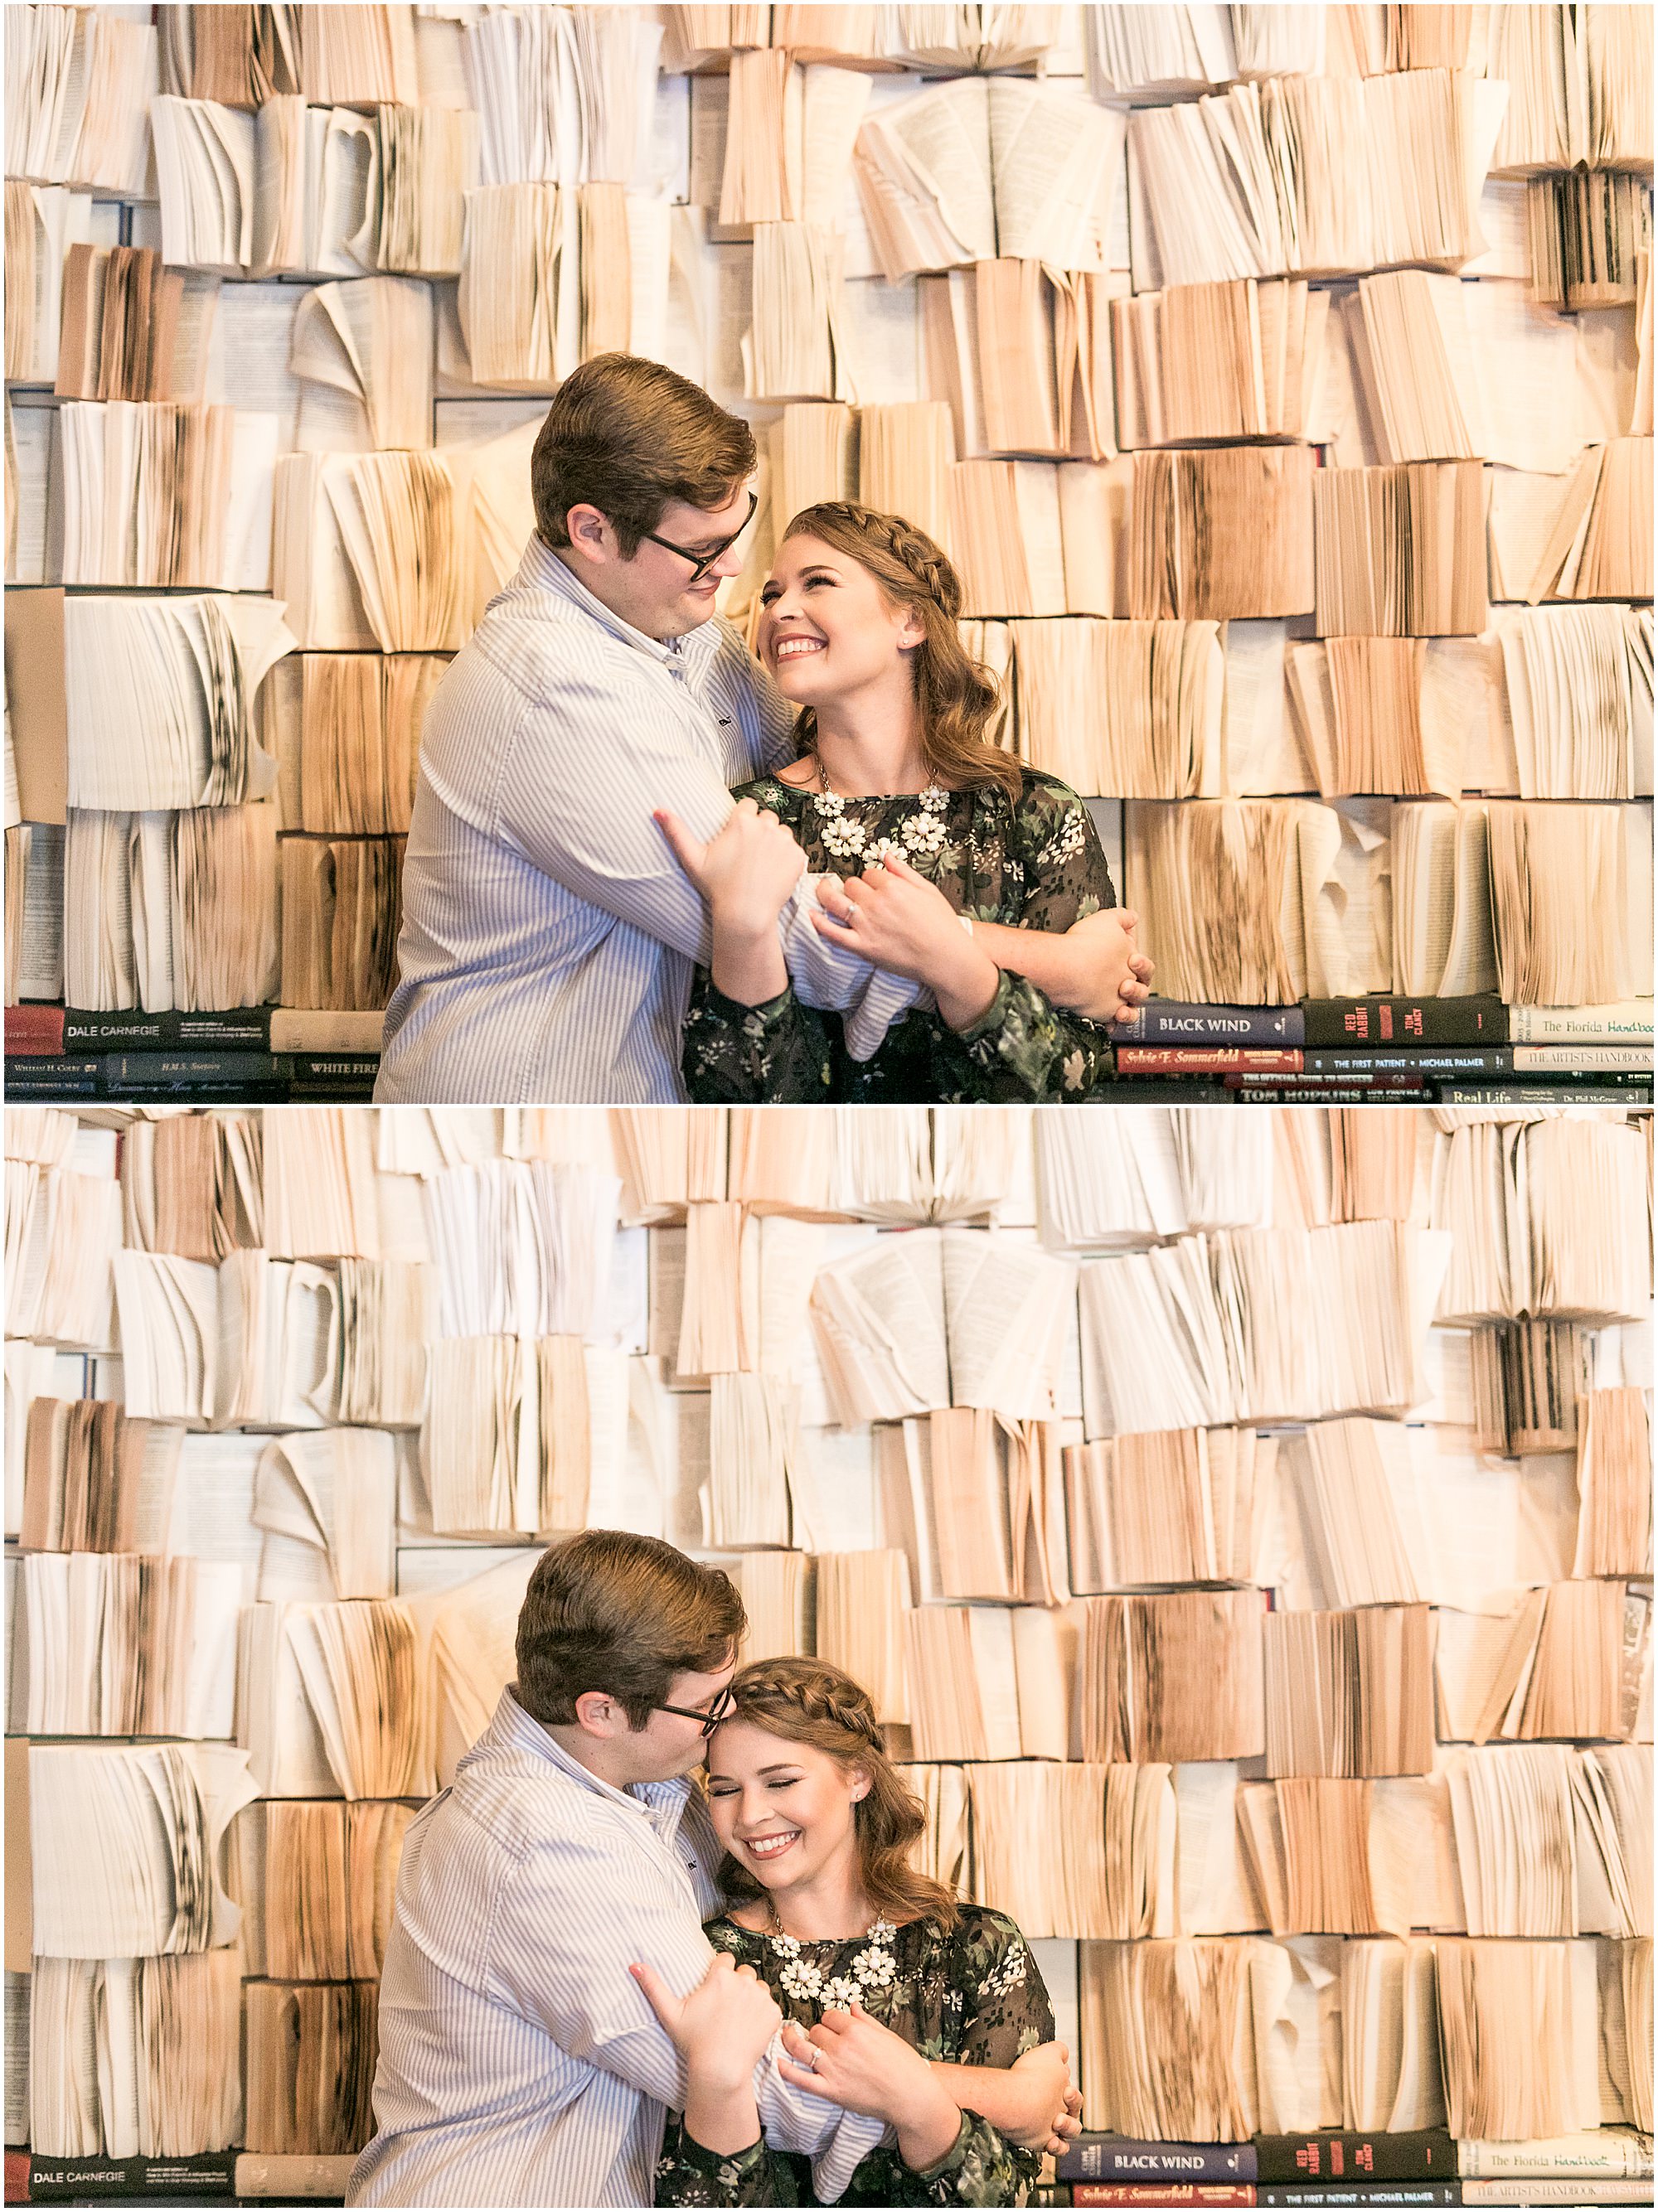 Sweet engagement couple cuddle while standing in front of a wall made of opened books